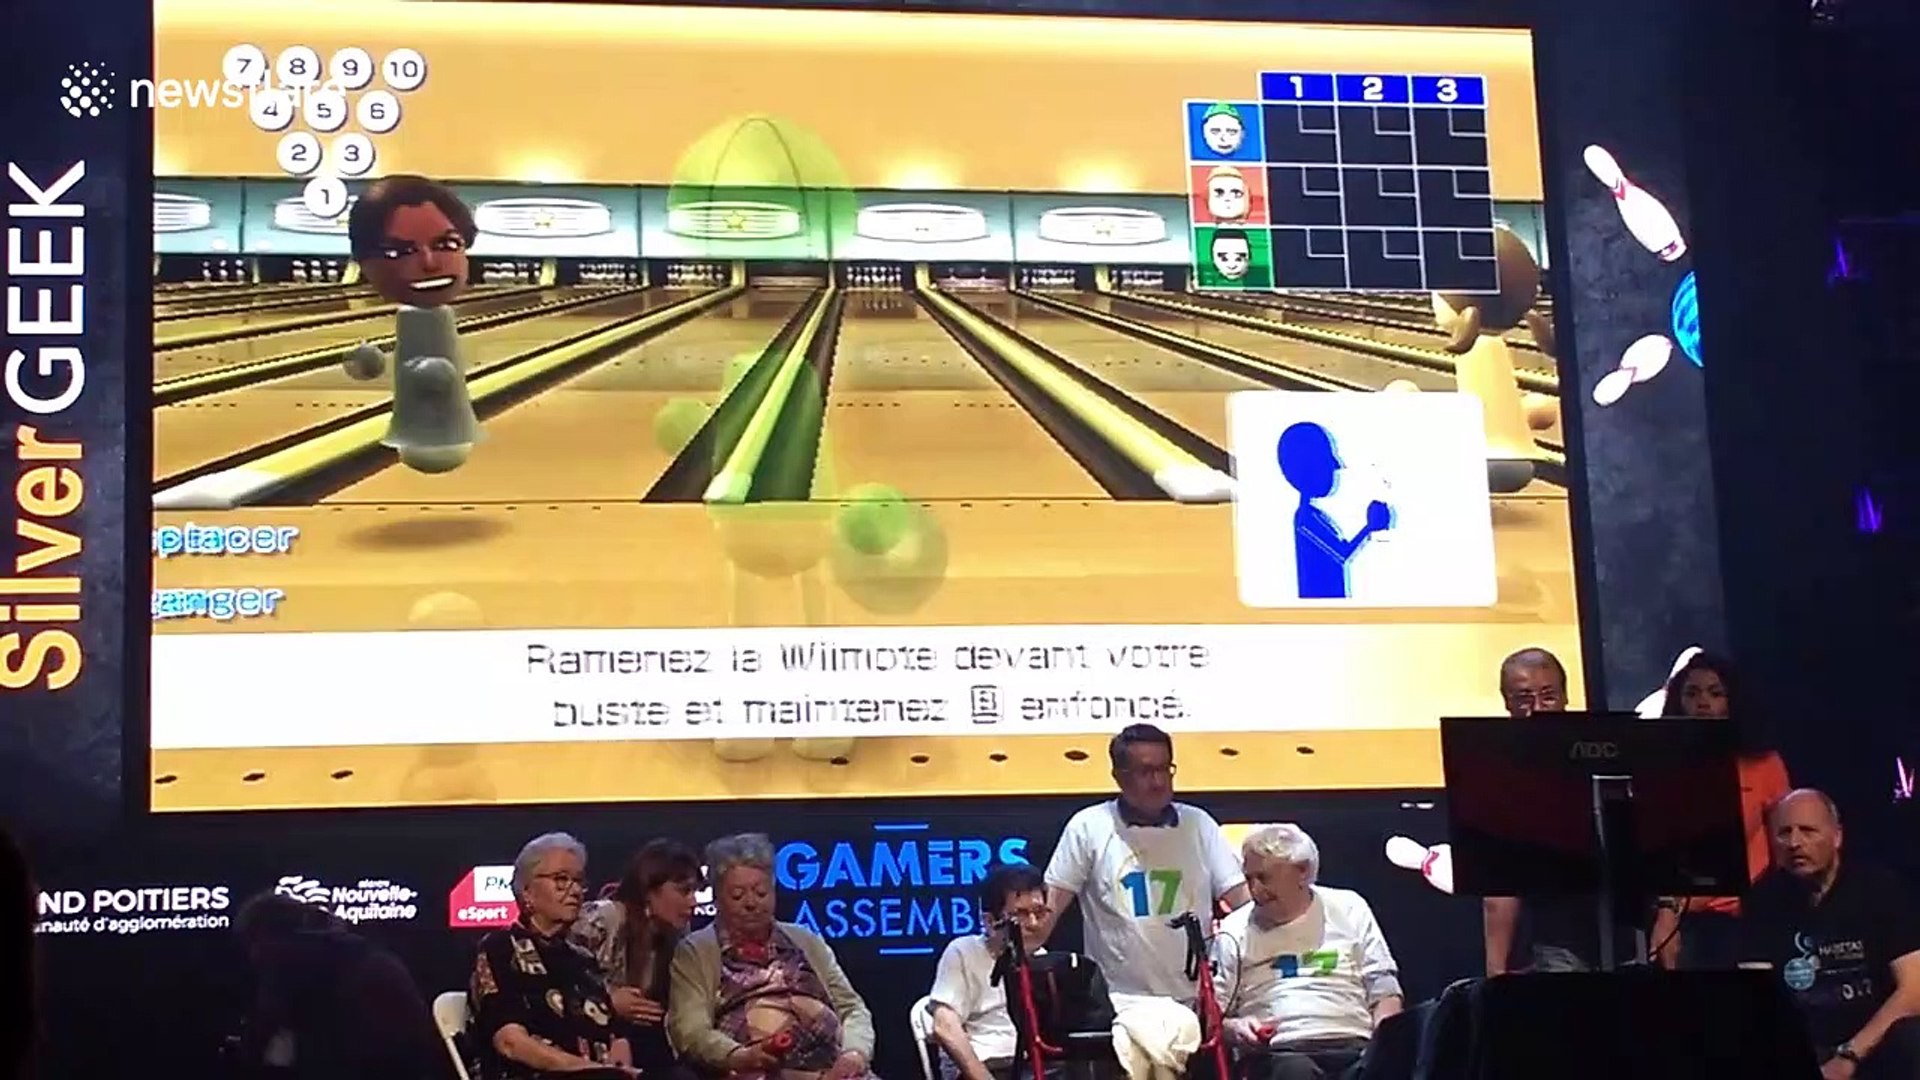 Crowd goes wild as elderly gamer scores a strike a bowling game competition  - video Dailymotion